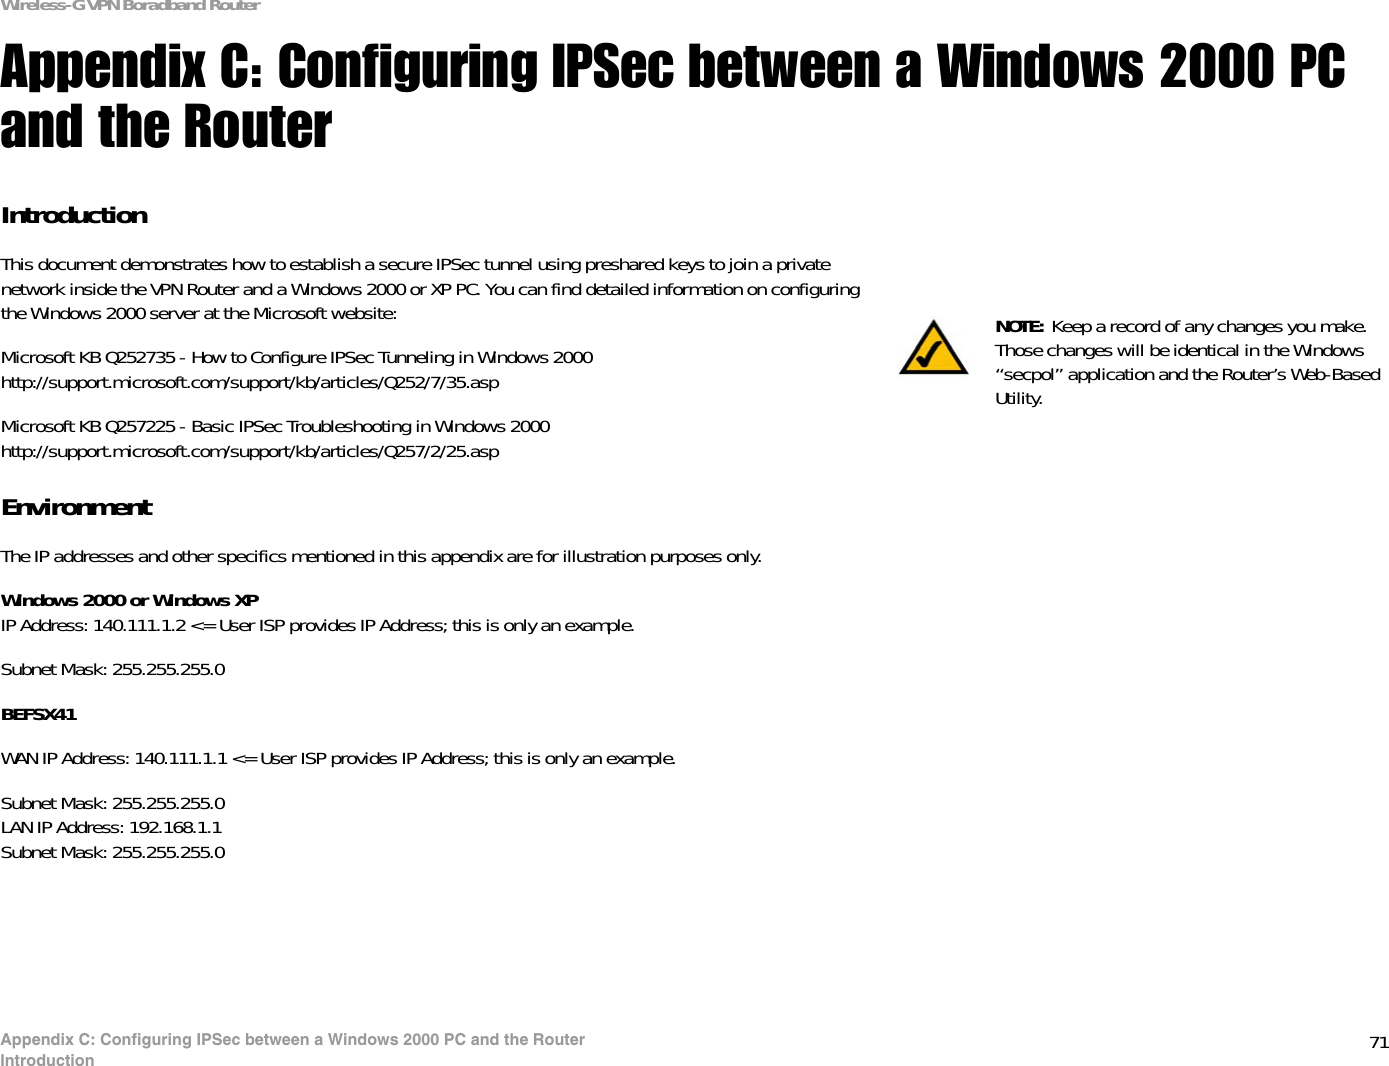 71Appendix C: Configuring IPSec between a Windows 2000 PC and the RouterIntroductionWireless-G VPN Boradband RouterAppendix C: Configuring IPSec between a Windows 2000 PC and the RouterIntroductionThis document demonstrates how to establish a secure IPSec tunnel using preshared keys to join a private network inside the VPN Router and a Windows 2000 or XP PC. You can find detailed information on configuring the Windows 2000 server at the Microsoft website: Microsoft KB Q252735 - How to Configure IPSec Tunneling in Windows 2000http://support.microsoft.com/support/kb/articles/Q252/7/35.aspMicrosoft KB Q257225 - Basic IPSec Troubleshooting in Windows 2000http://support.microsoft.com/support/kb/articles/Q257/2/25.aspEnvironmentThe IP addresses and other specifics mentioned in this appendix are for illustration purposes only.Windows 2000 or Windows XPIP Address: 140.111.1.2 &lt;= User ISP provides IP Address; this is only an example.Subnet Mask: 255.255.255.0BEFSX41WAN IP Address: 140.111.1.1 &lt;= User ISP provides IP Address; this is only an example.Subnet Mask: 255.255.255.0LAN IP Address: 192.168.1.1Subnet Mask: 255.255.255.0NOTE: Keep a record of any changes you make. Those changes will be identical in the Windows “secpol” application and the Router’s Web-Based Utility.